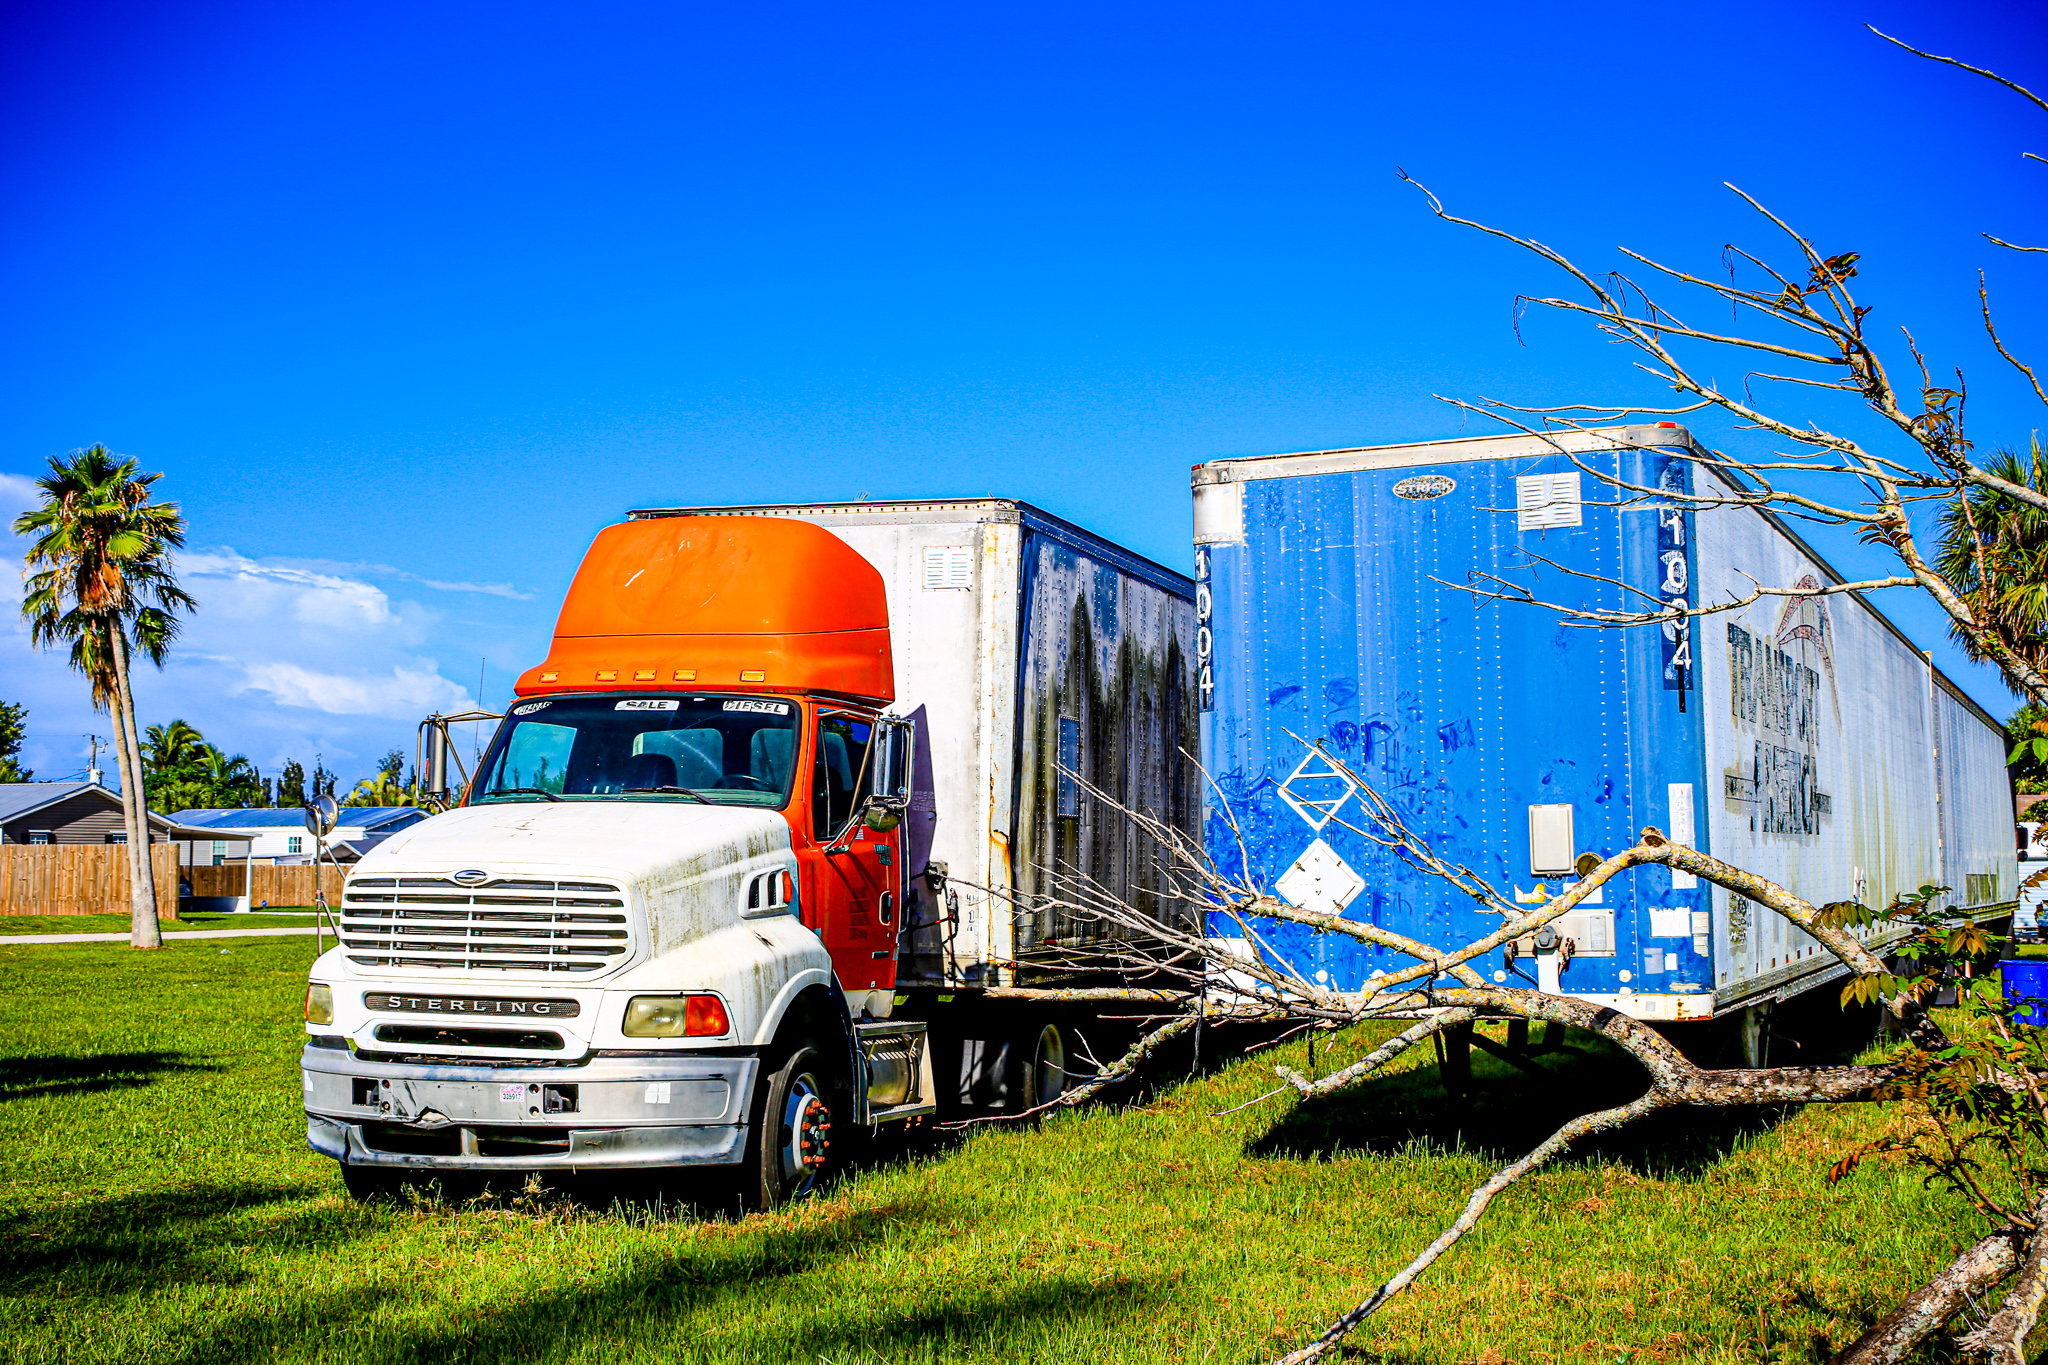 Abandoned in Time A large orange semi-truck is attached to a white trailer with blue accents, parked on a grassy area under a blue sky.